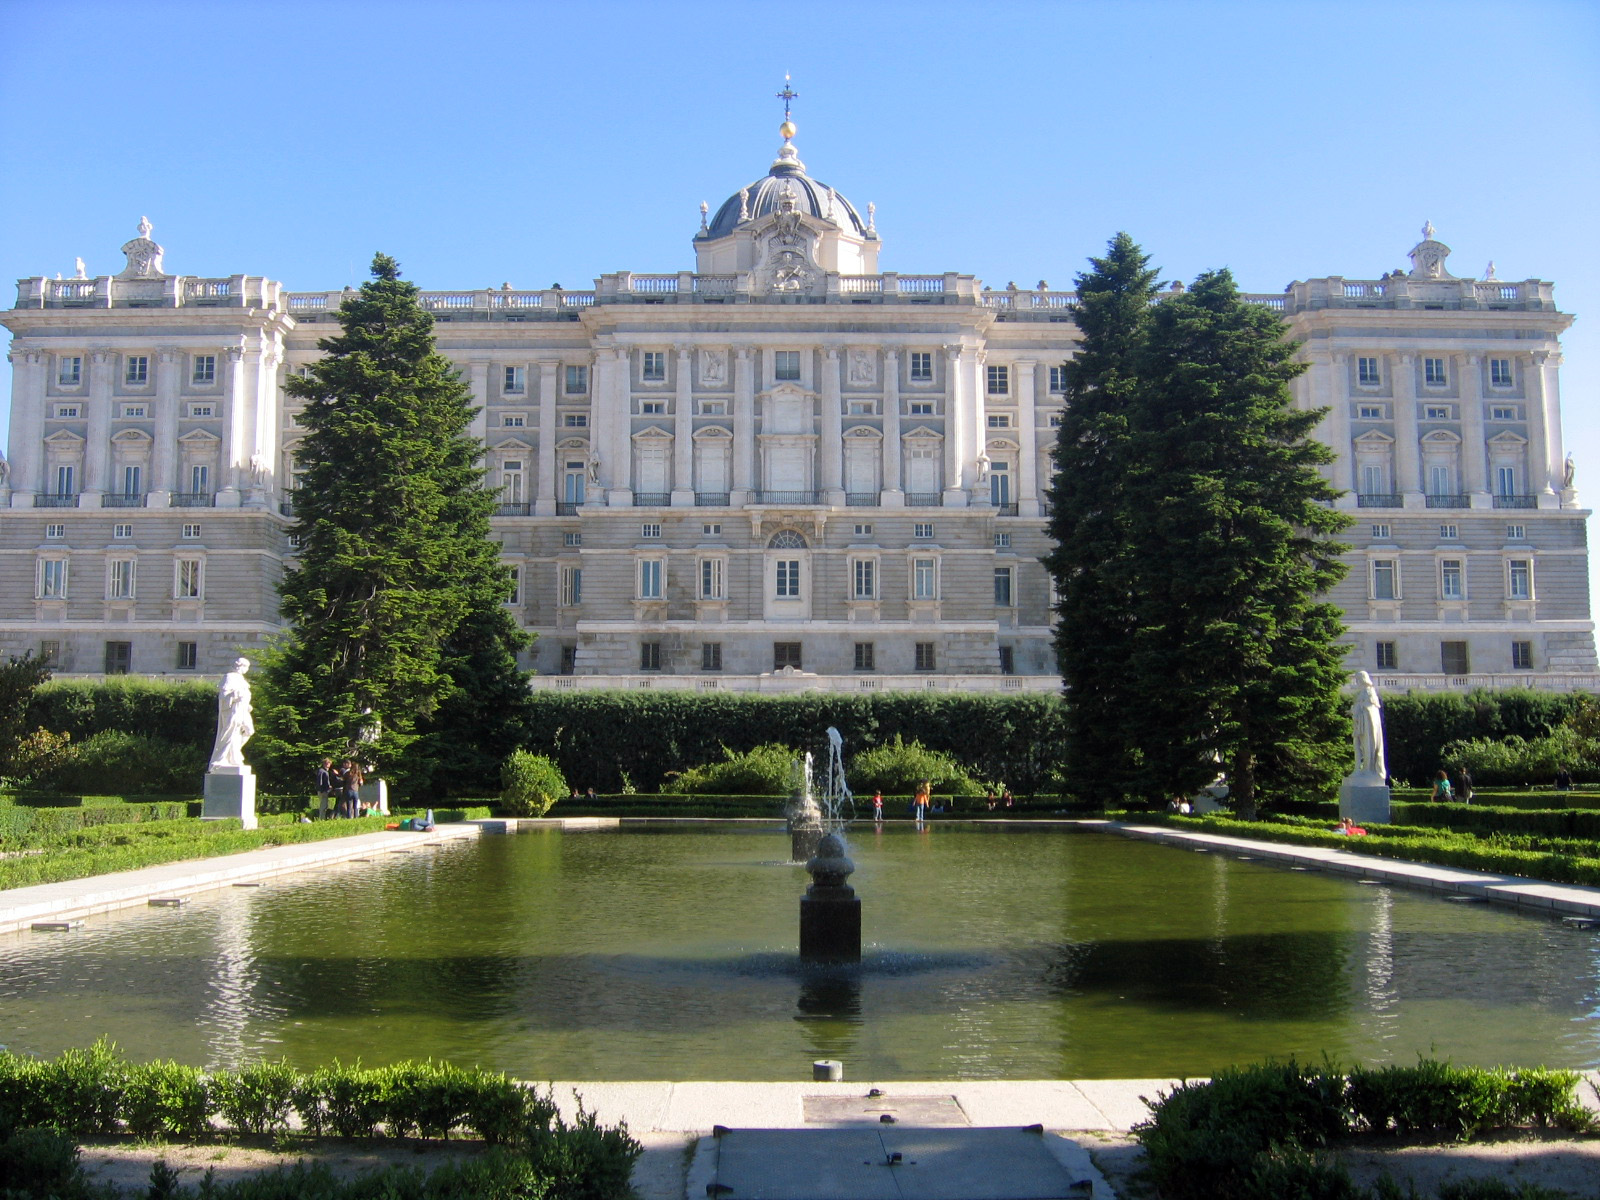 A view of the Royal Palace and fountains in Madrid, Spain.